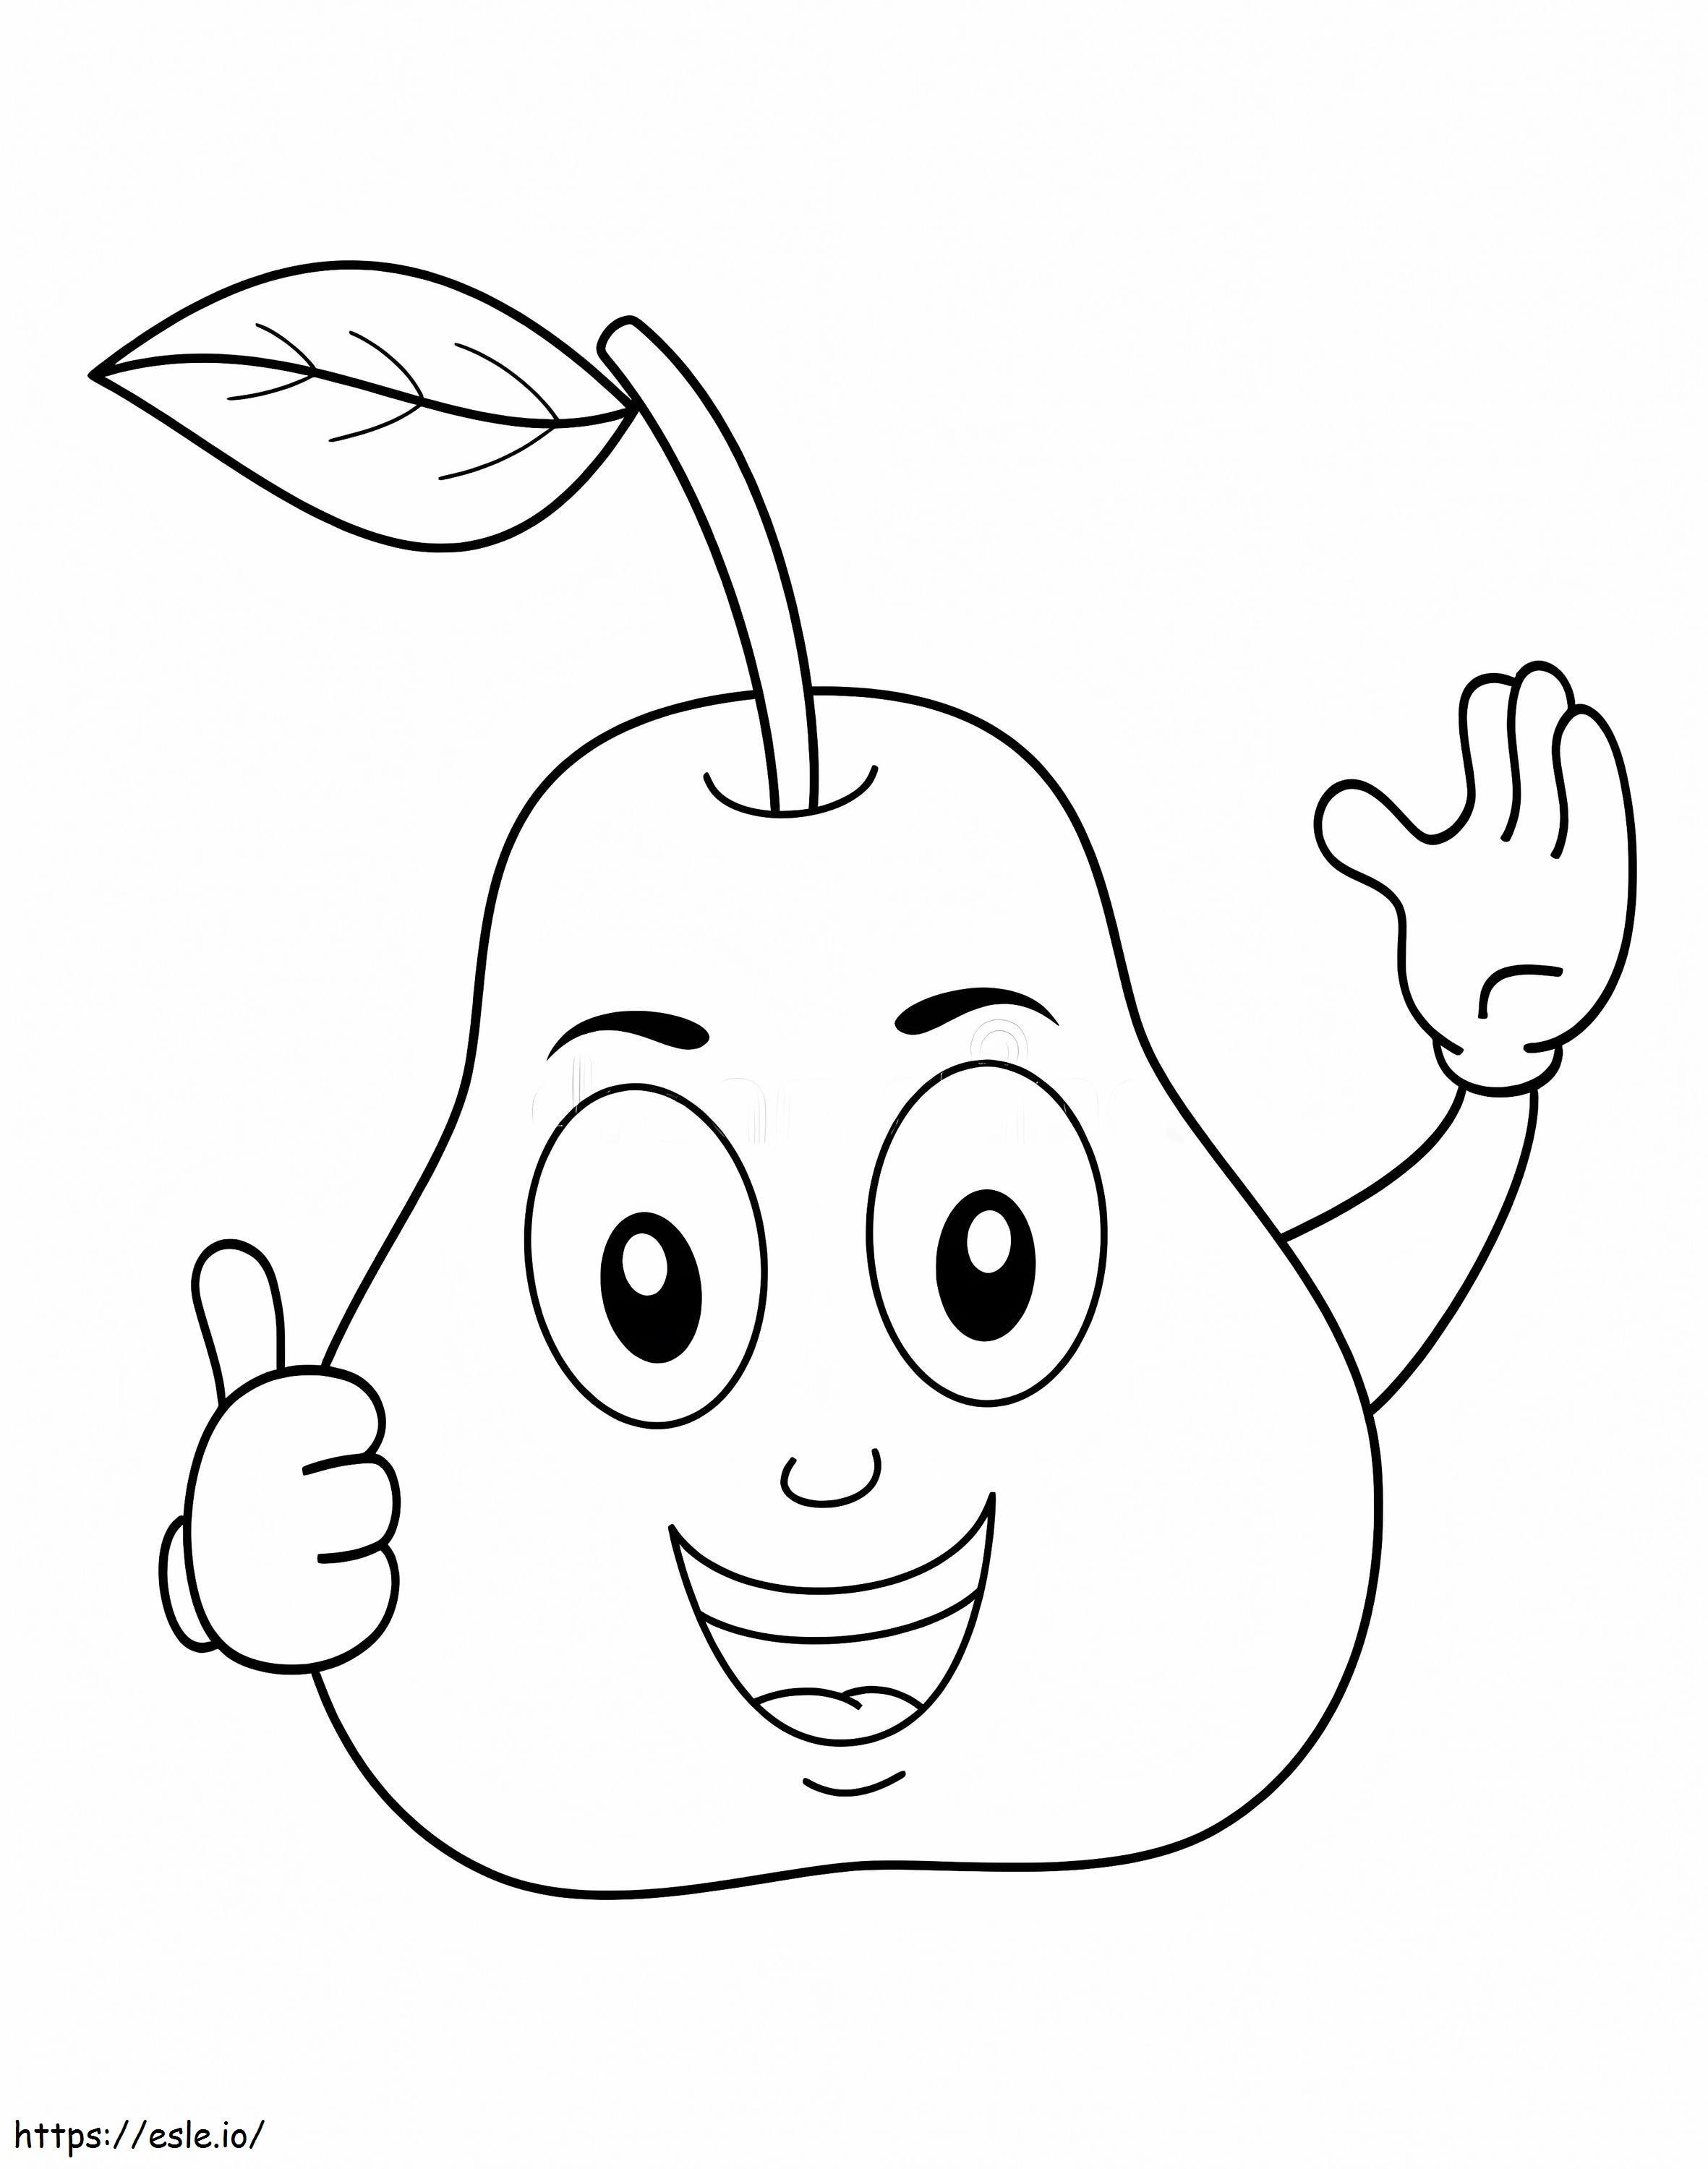 Funny Pear coloring page